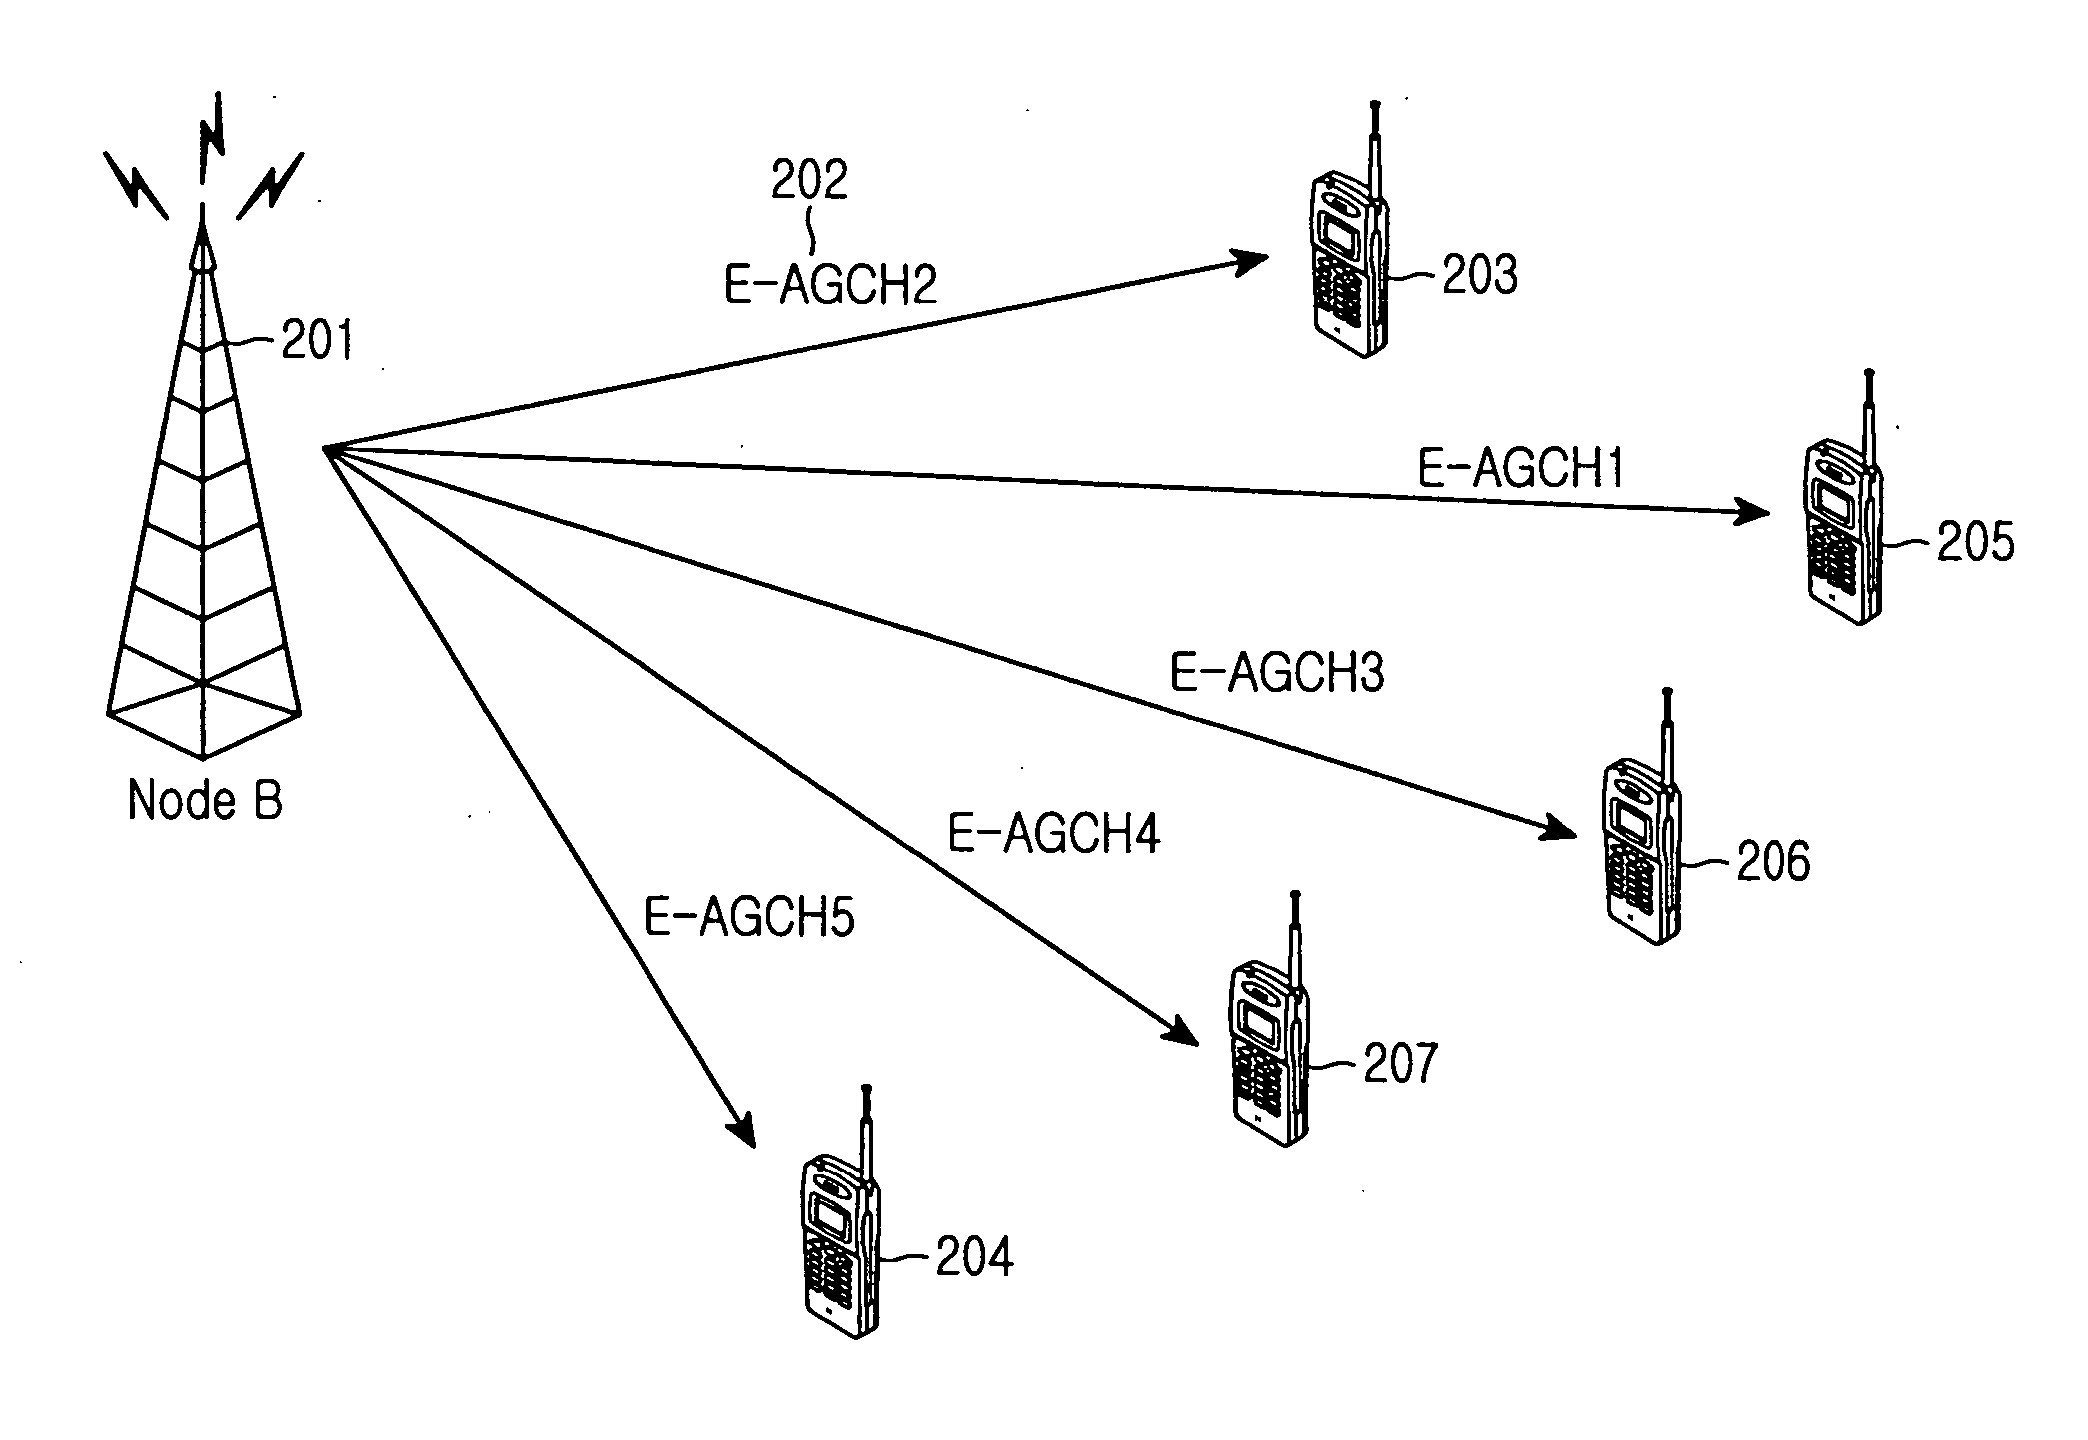 Method and apparatus for scheduling uplink data transmission using UE-ID in a mobile communication system supporting uplink packet data service